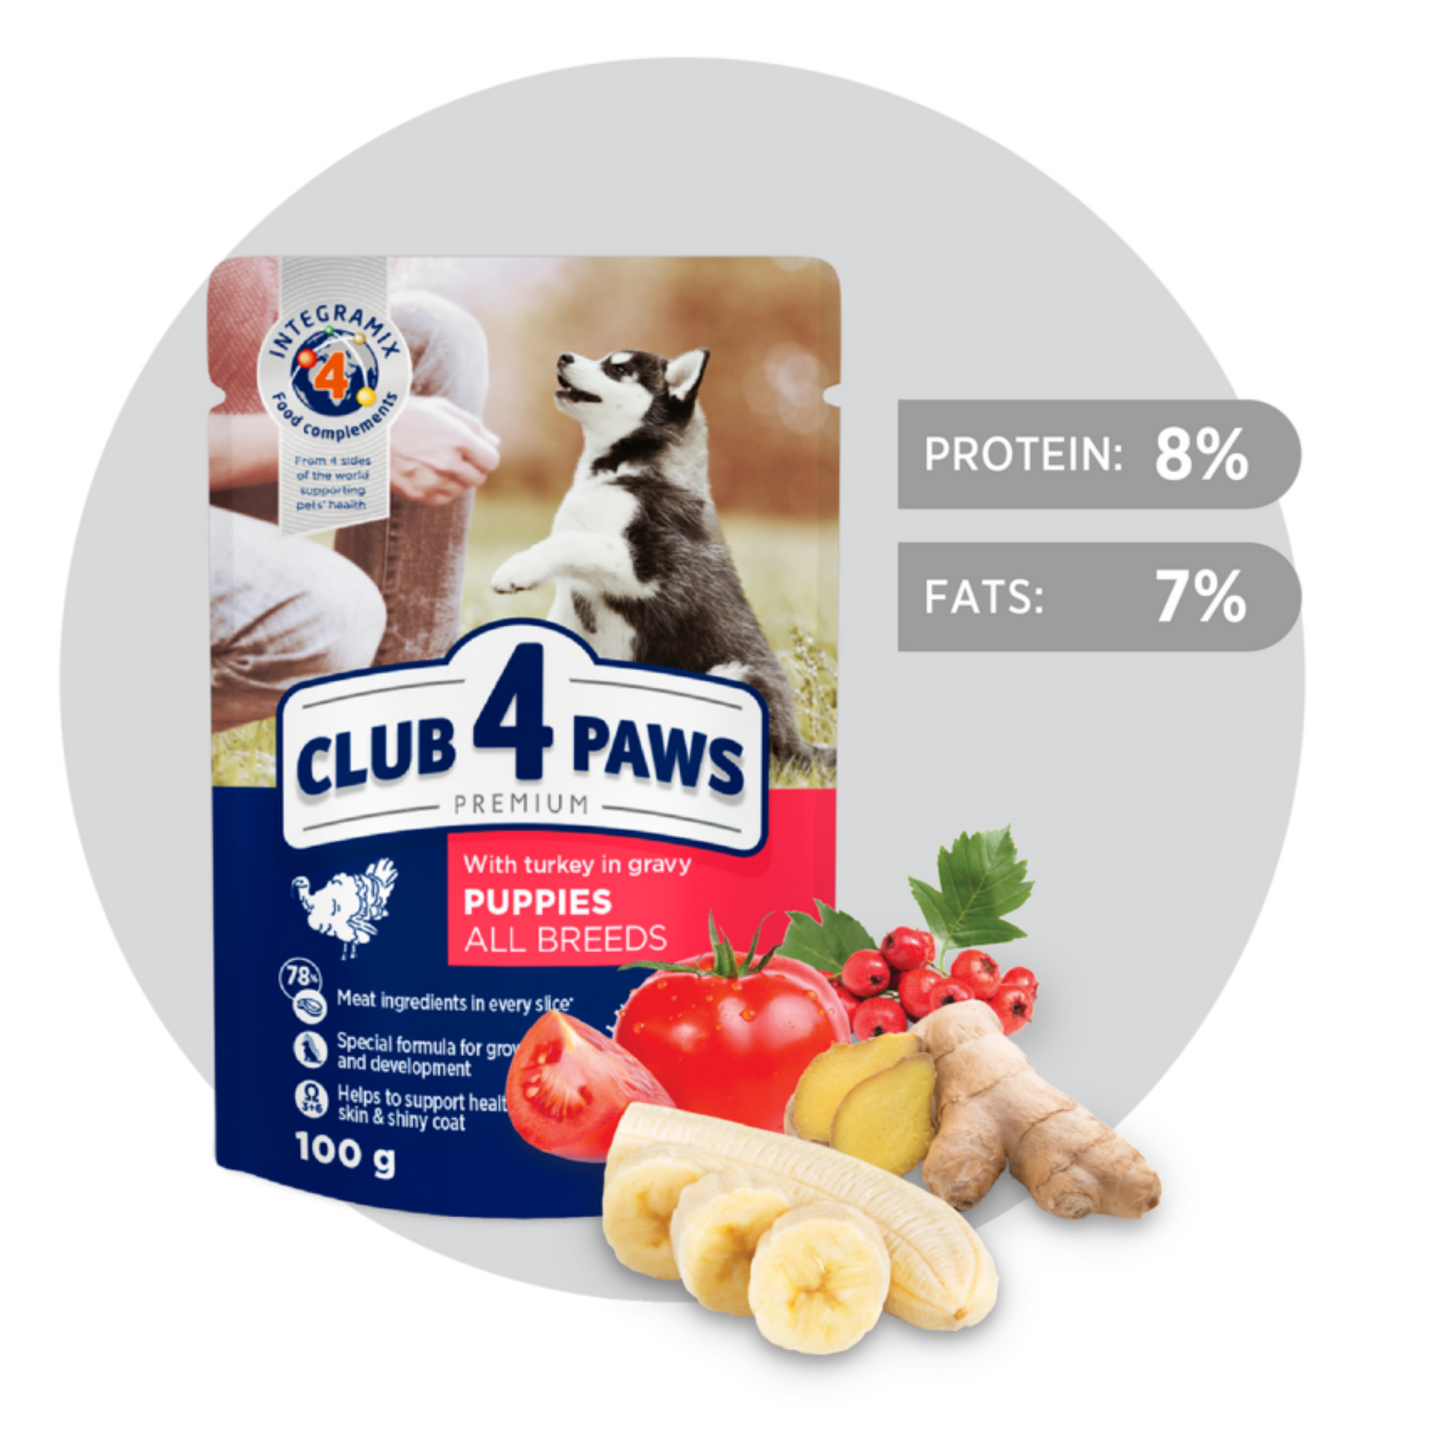 CLUB 4 PAWS Premium For Puppies Pouches "Turkey in Sauce"